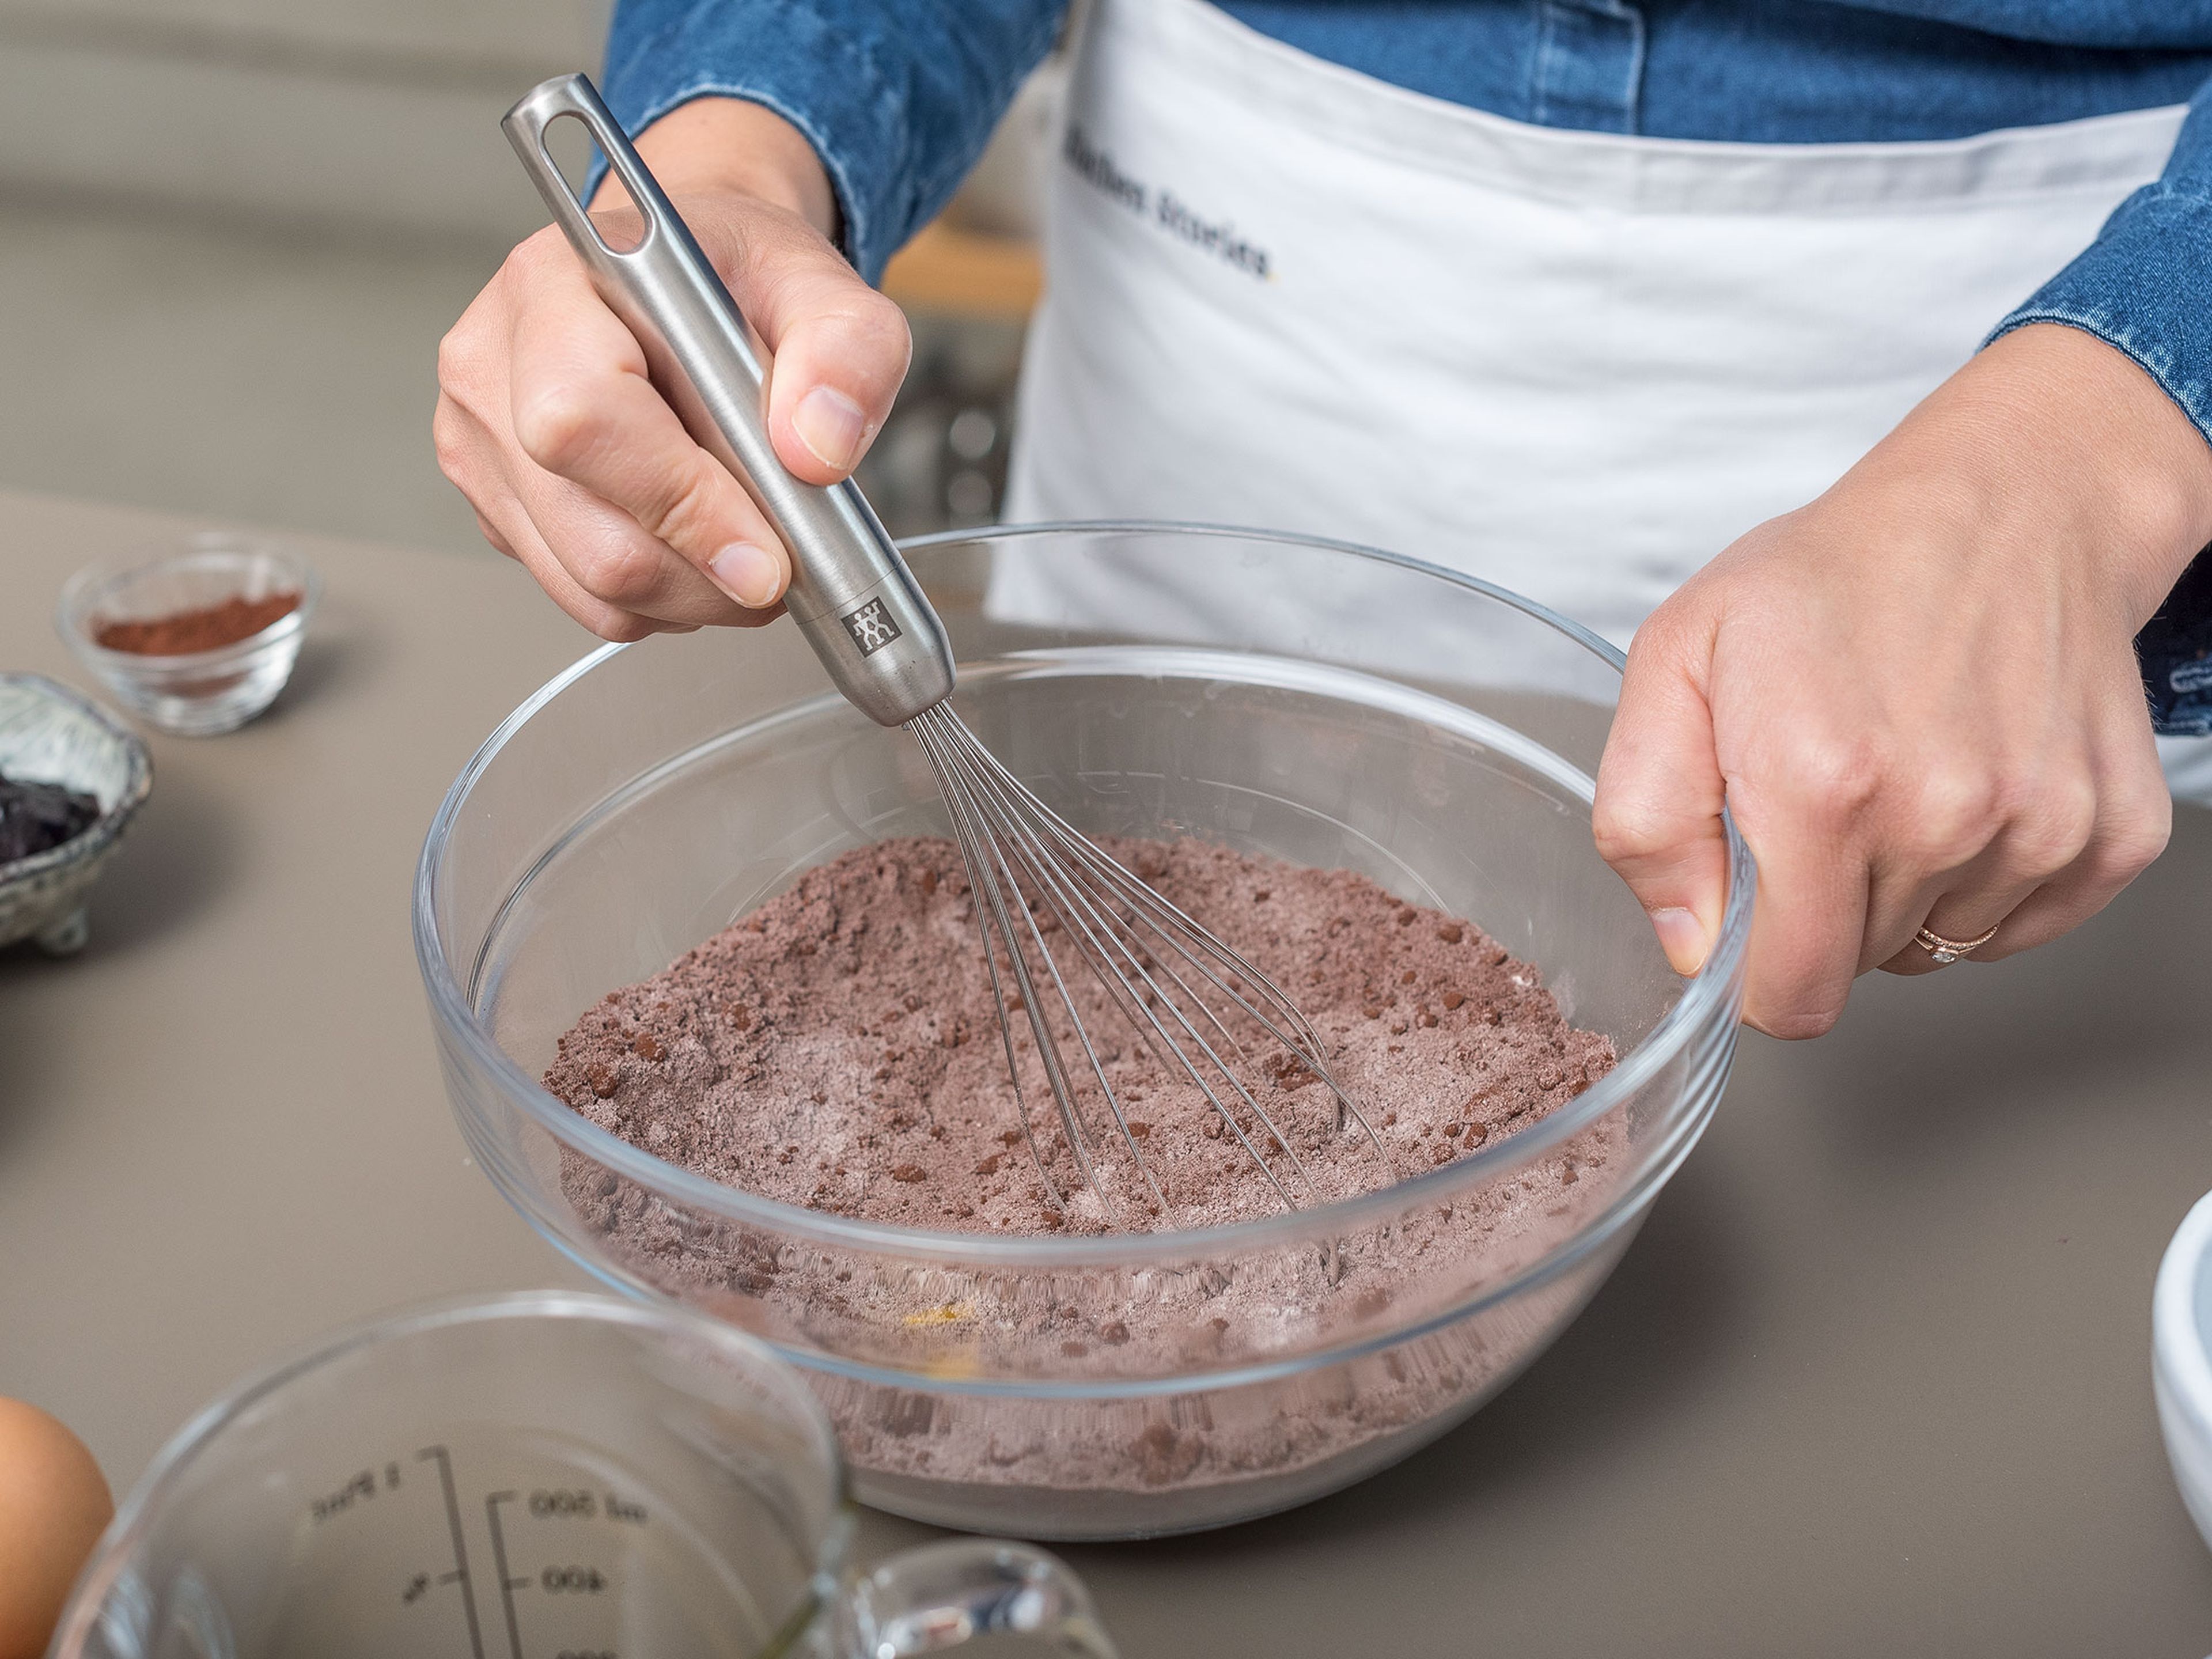 Preheat the oven to 175°C/350°F (top and bottom heat). Grease springform pan with olive oil. Set aside. In a large bowl, mix the flour with sugar, cocoa powder, salt, and baking powder.